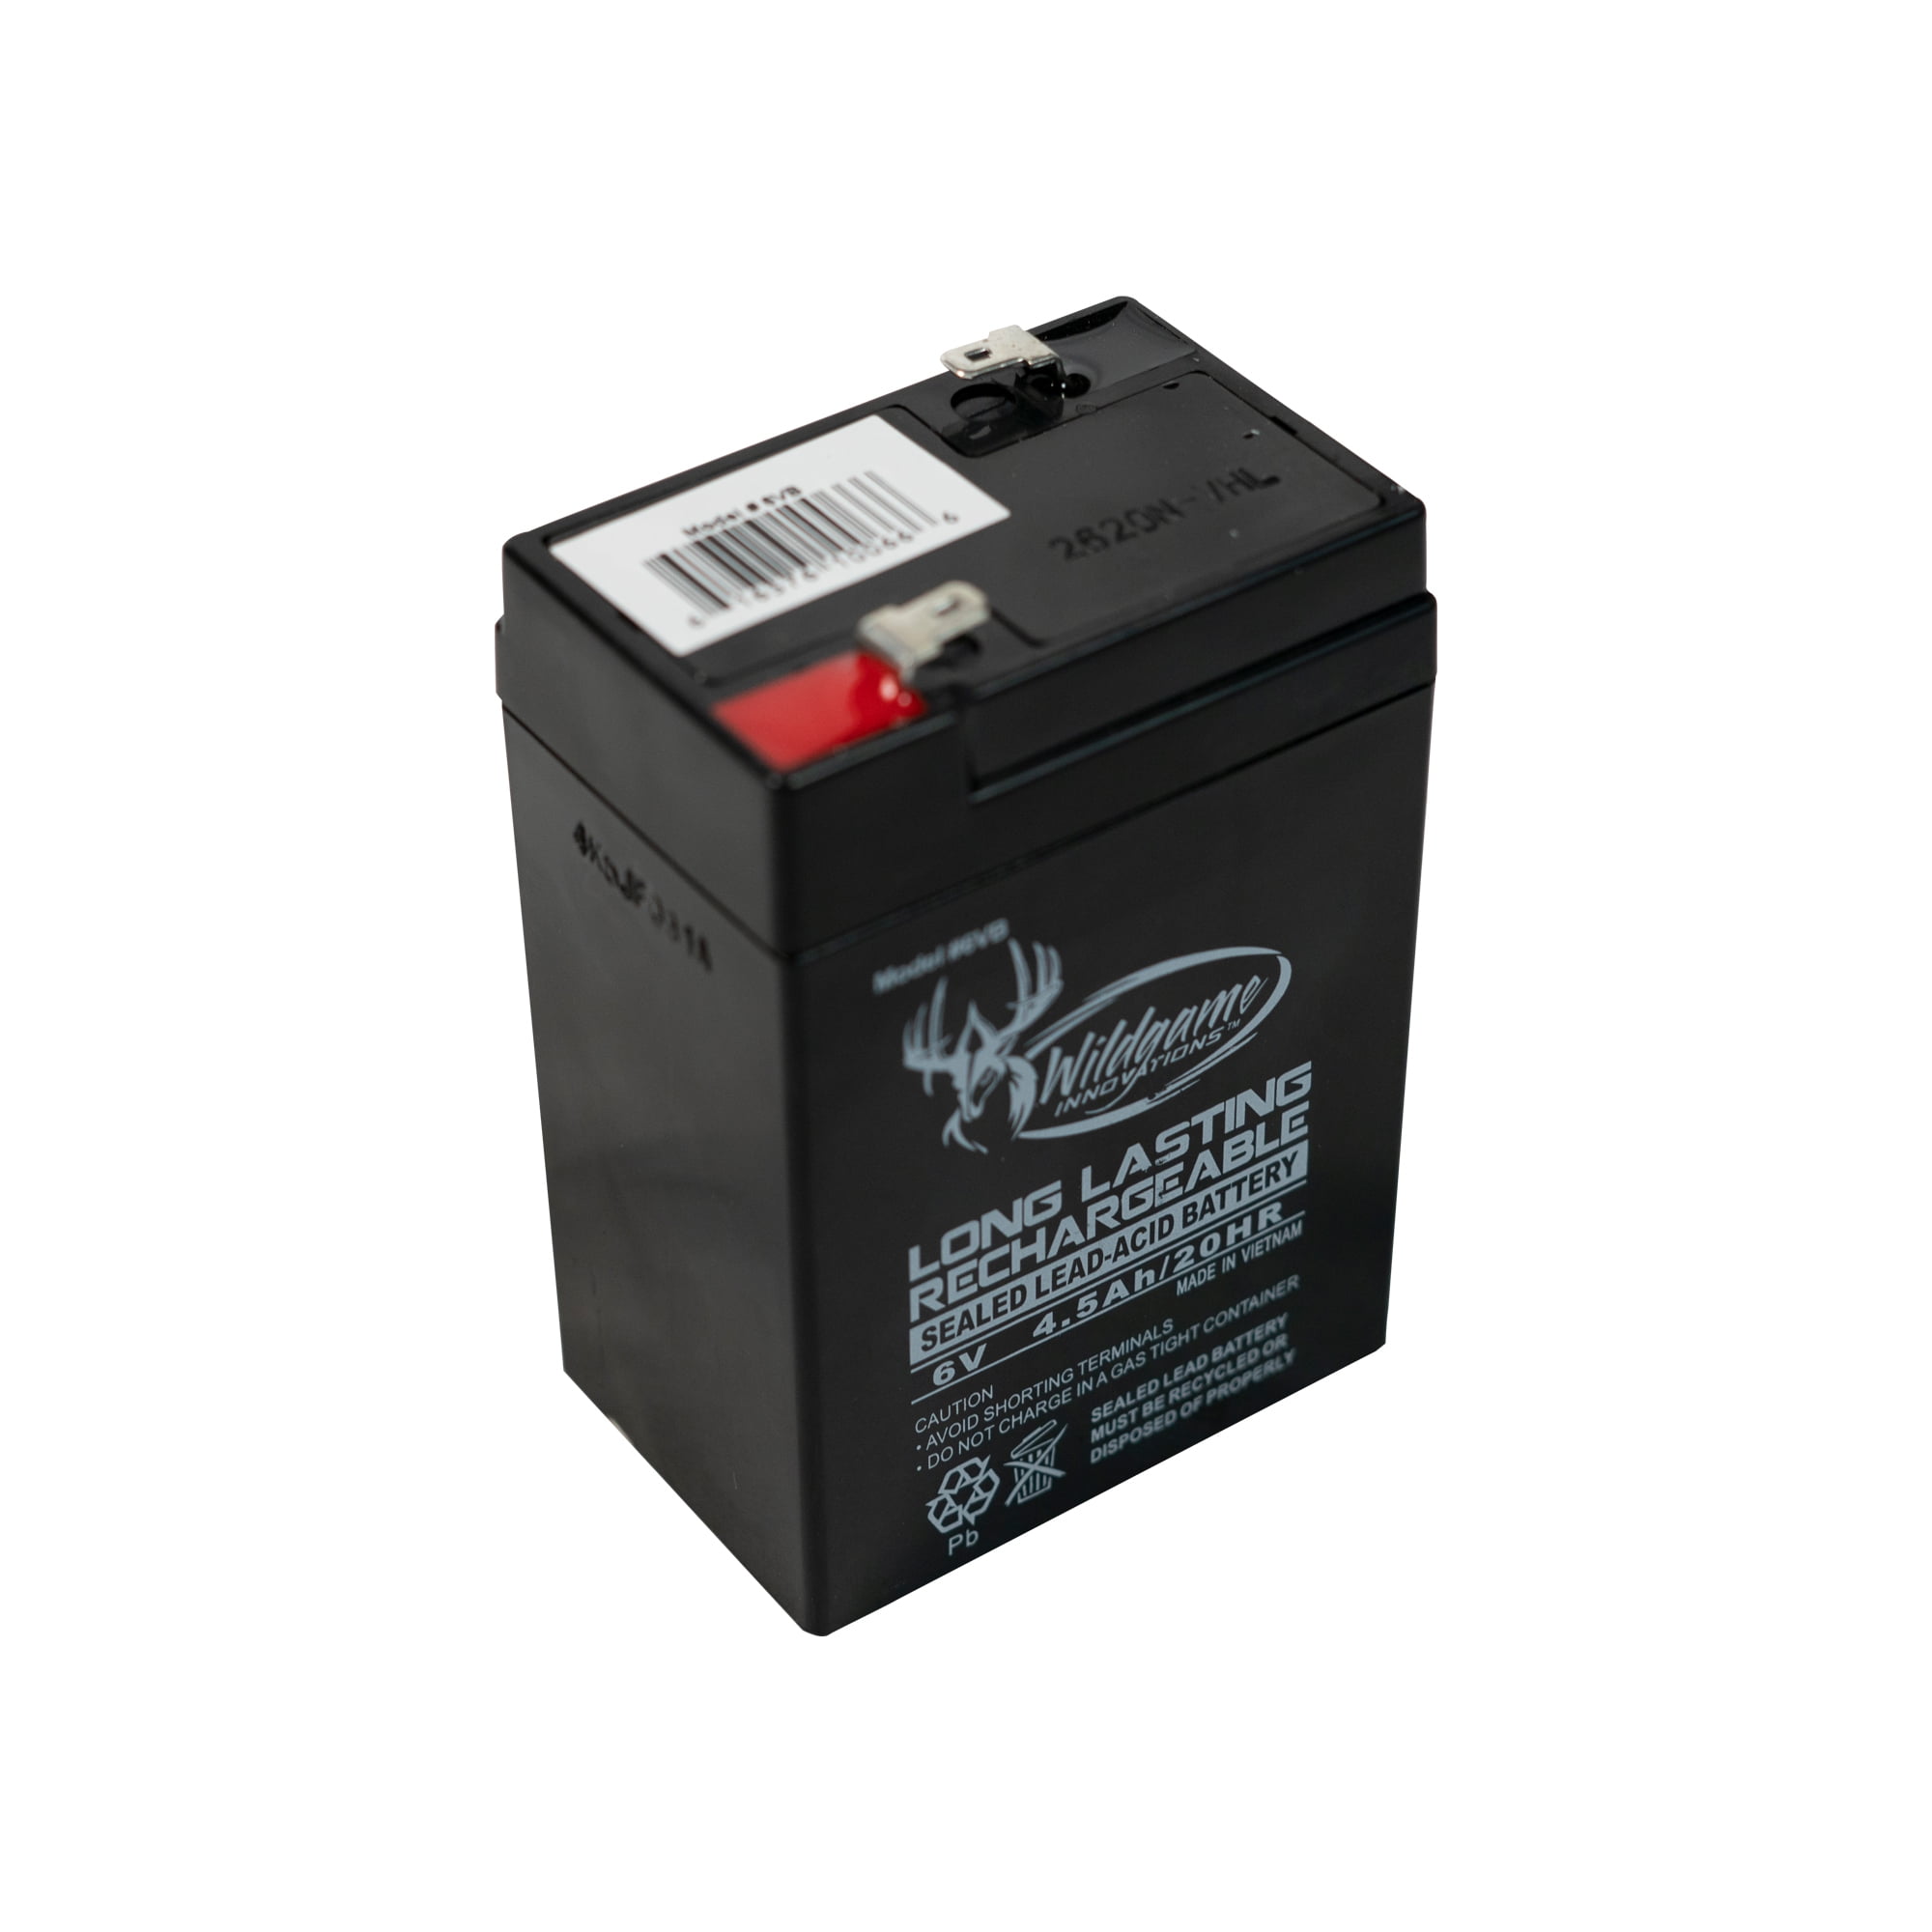 Universal Power Group Wild Game Innovations 6-Volt eDRENALINE Tab Style Rechargeable Battery 2 Pack 